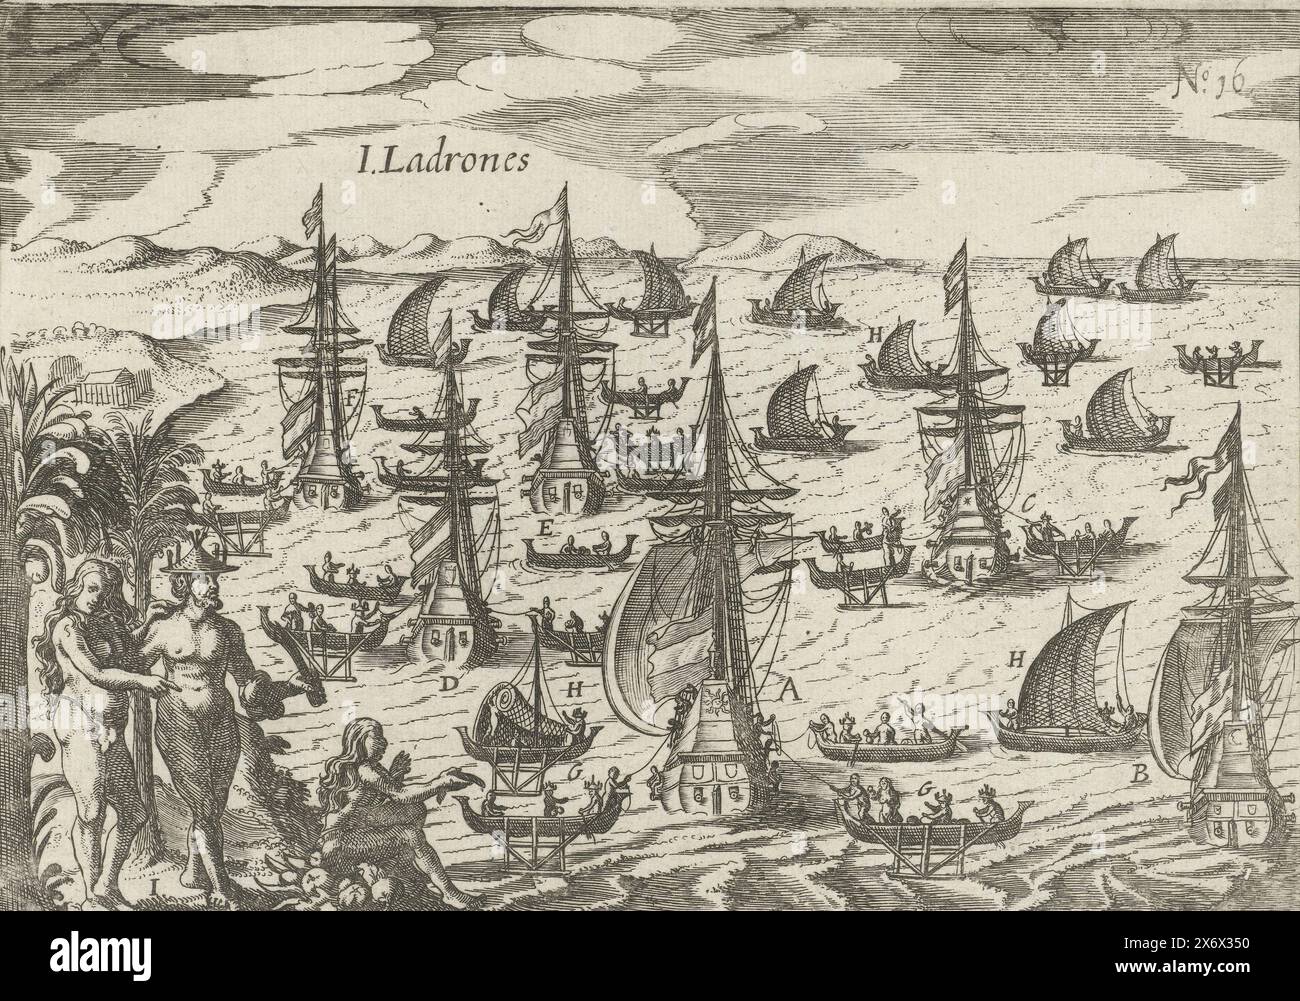 Arrival at the Ladrones Islands, 1616, I. Ladrones (title on object), Image of the Islas de Las Velas, ort Ladrones, Arrival of the fleet at the Ladrones or Mariana Islands, January 1616. The ships are at anchor: the Son, the Maen, the Morghen-Star, the Aeolus, the Hunter and the captured ship. In the water different types of local vessels. In the left foreground two examples of the local population. Part of the illustrations in the report of Joris van Spilbergen's journey around the world, 1614-1617, No. 16., print, print maker: anonymous, Northern Netherlands, 1617 - 1619 and/or 1646, paper Stock Photo